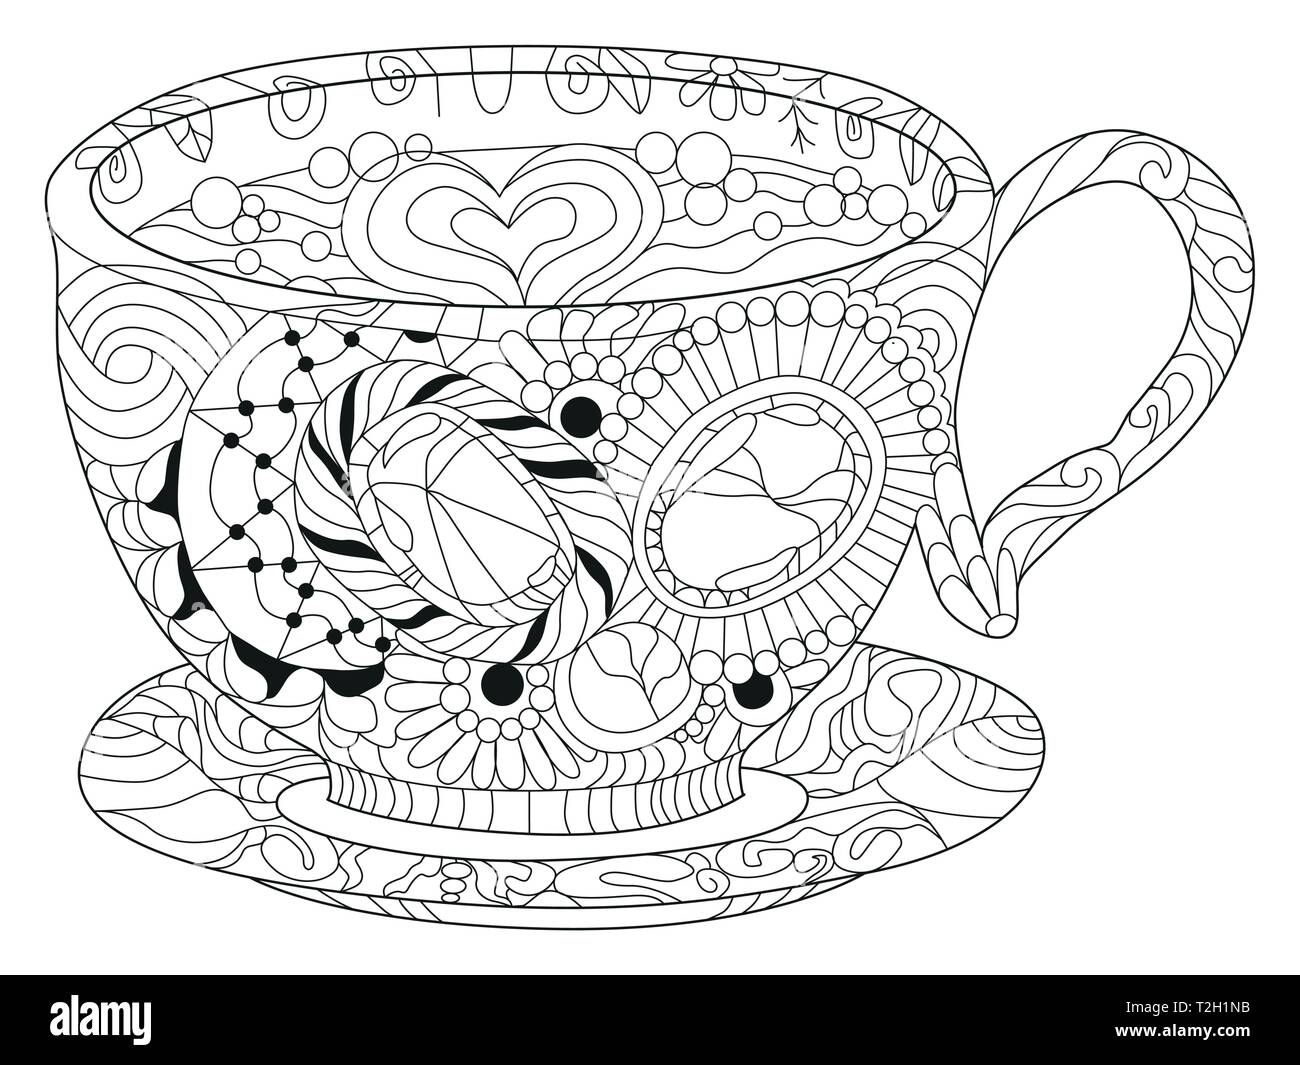 Vector coffee or tea cup with abstract ornaments. Hand drawn illustration for coloring book for adult in zentangle, doodle style. Coloring pages. Stock Vector